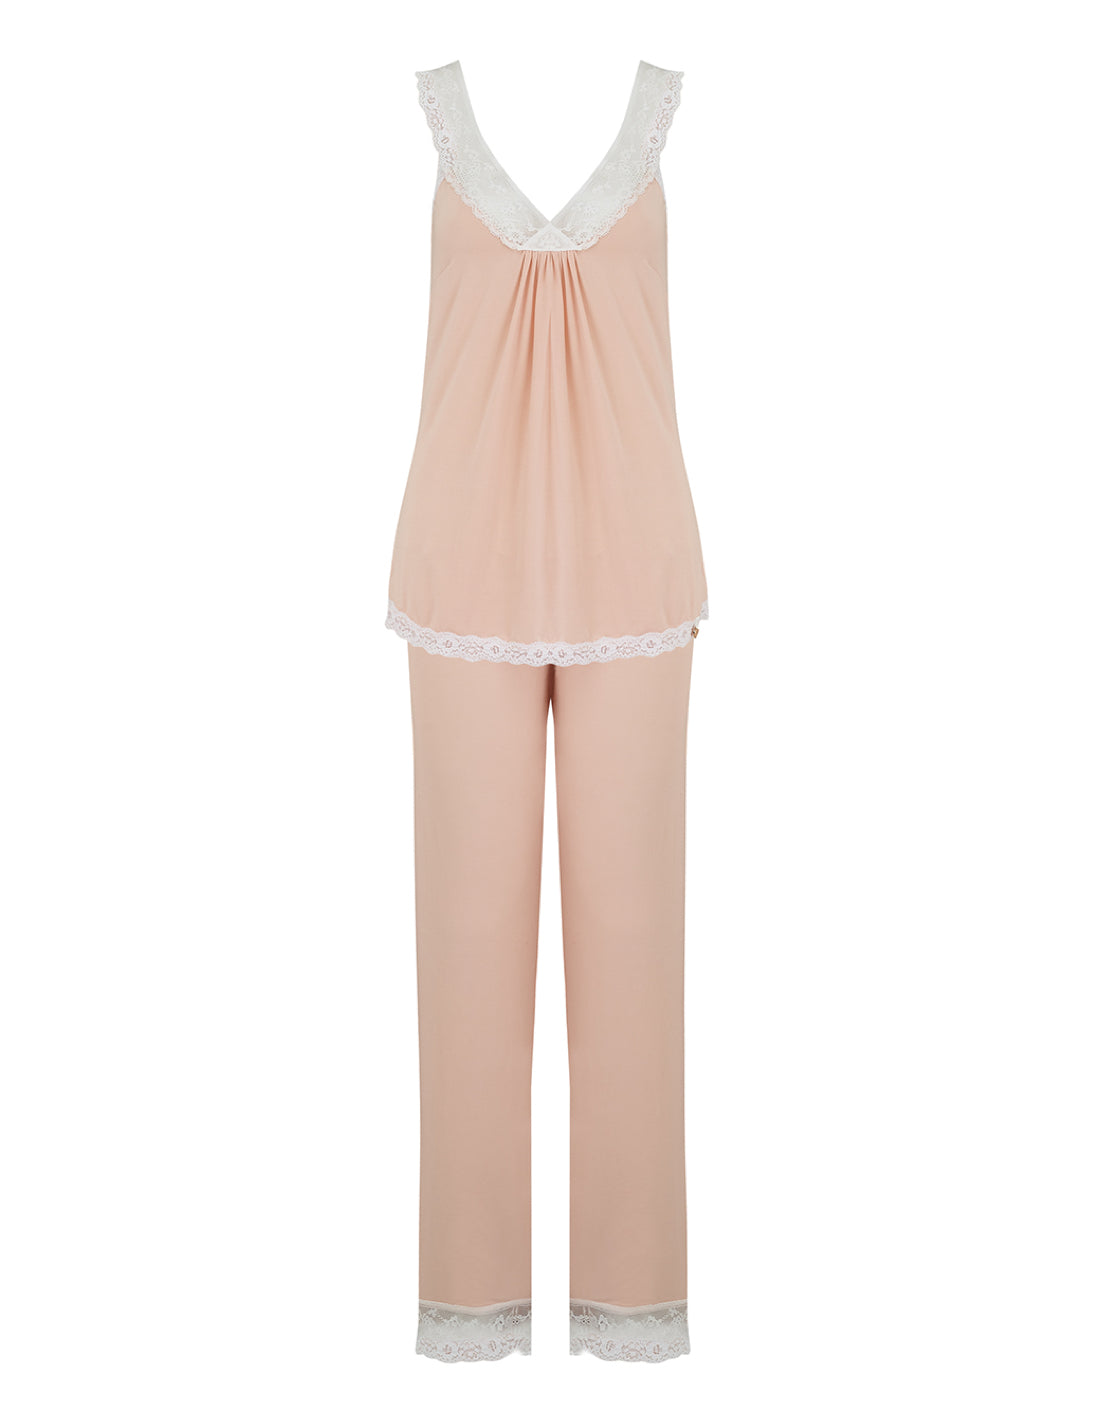 Peaches and Cream Lounge Pants